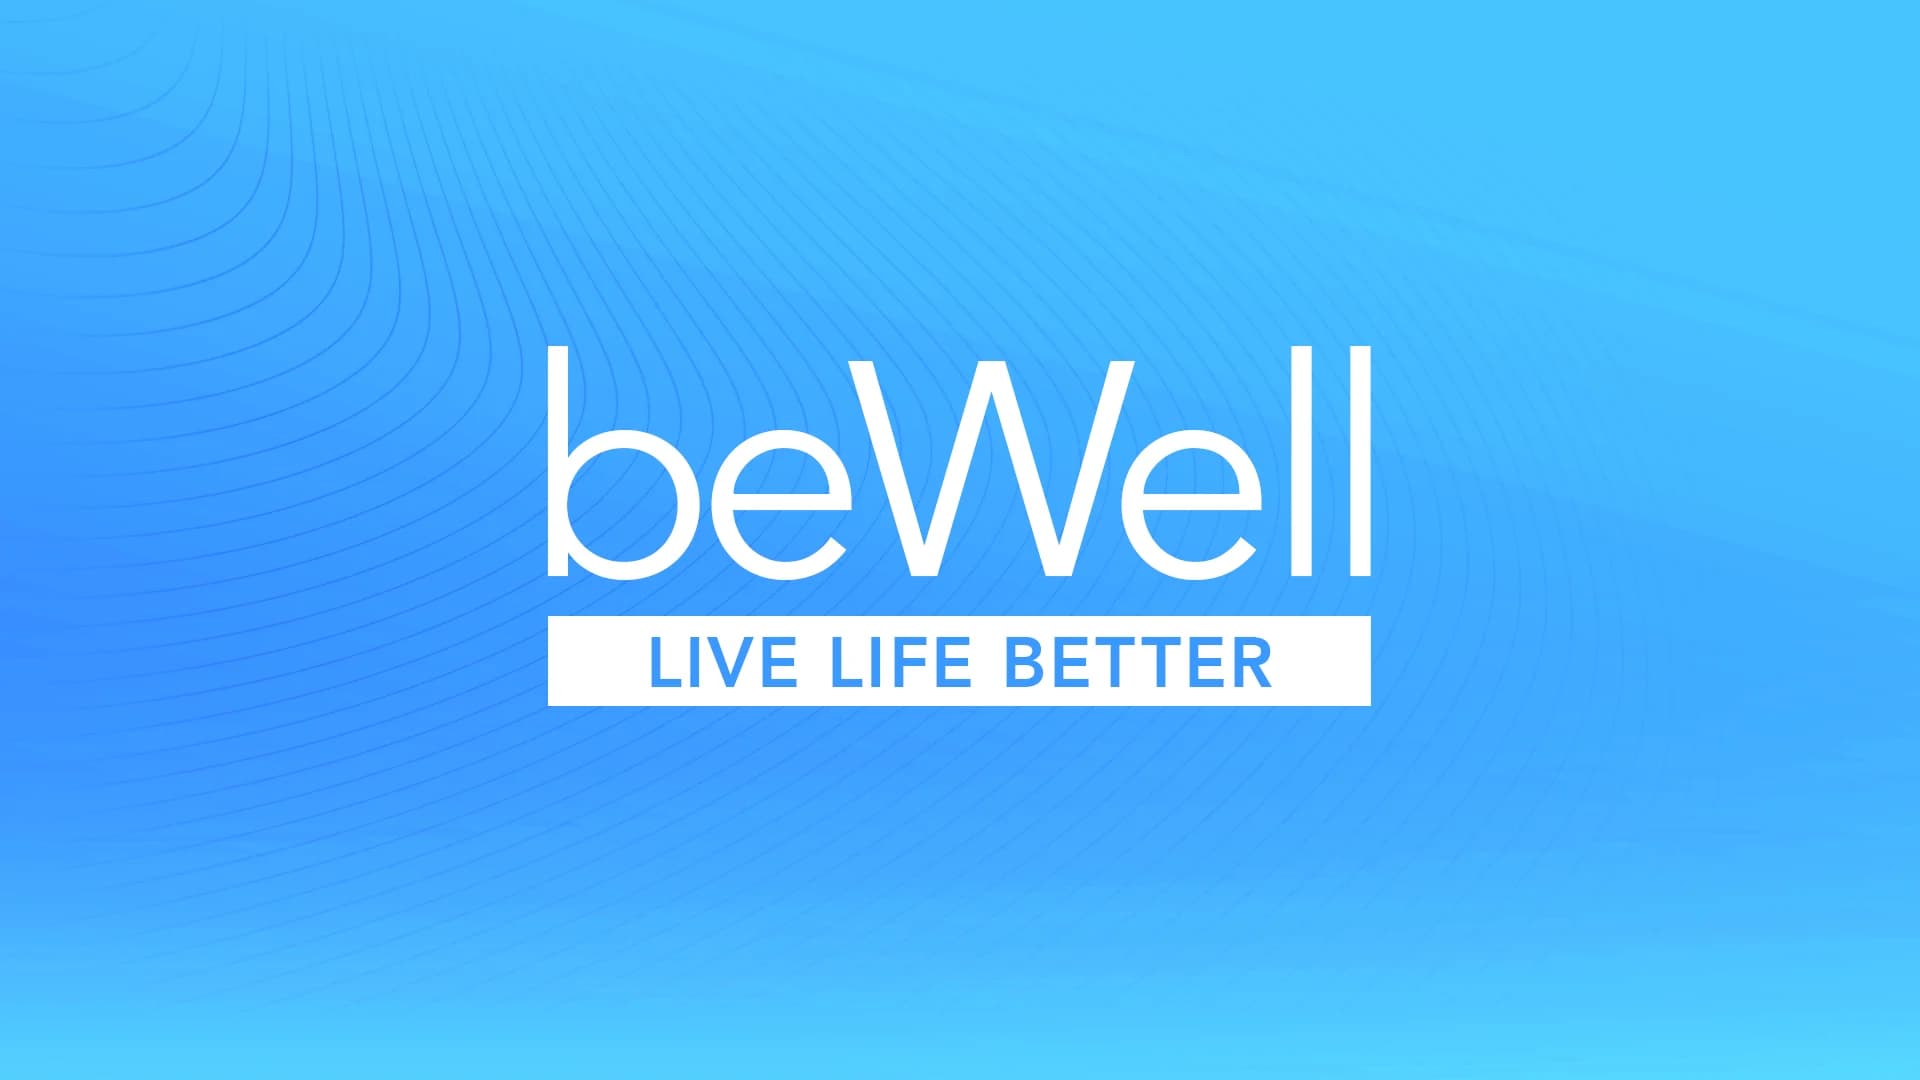 Do you have questions for the be Well team? Reach out to them here.